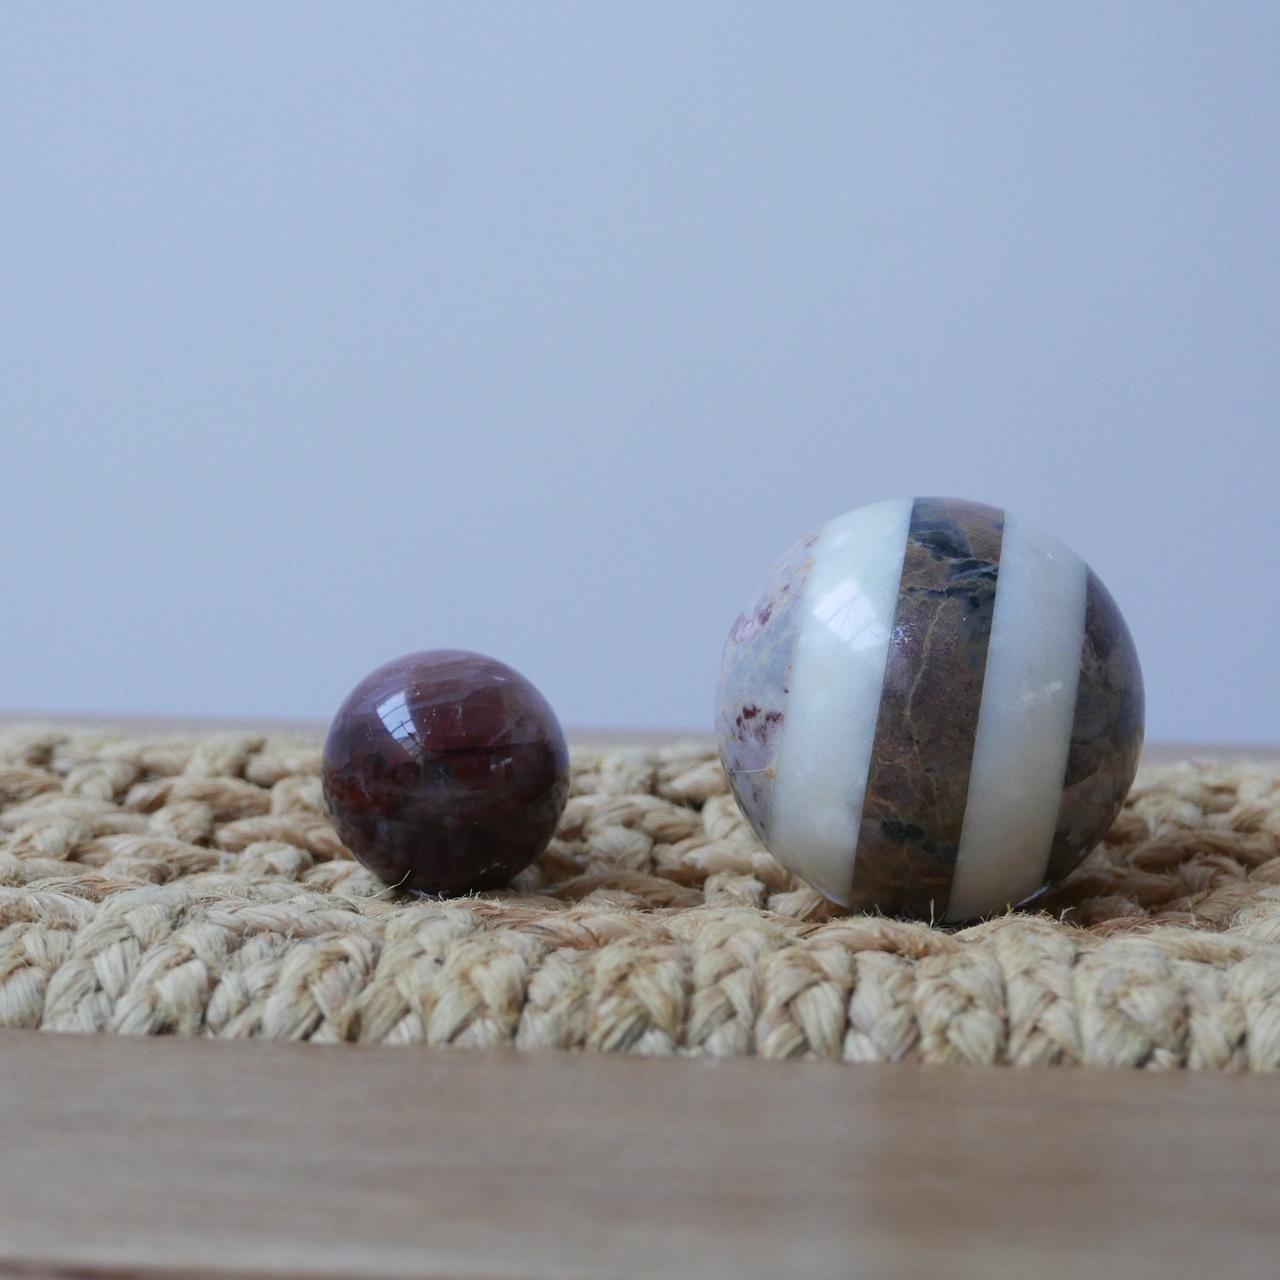 A pair of marble specimen balls.

Simple decorative objects for a shelf or desk top.

Very tactile.

The larger one in particular is made from segmented specimens.

Price is for the pair. 

Dimensions: 10 diameter large, 6 diameter small